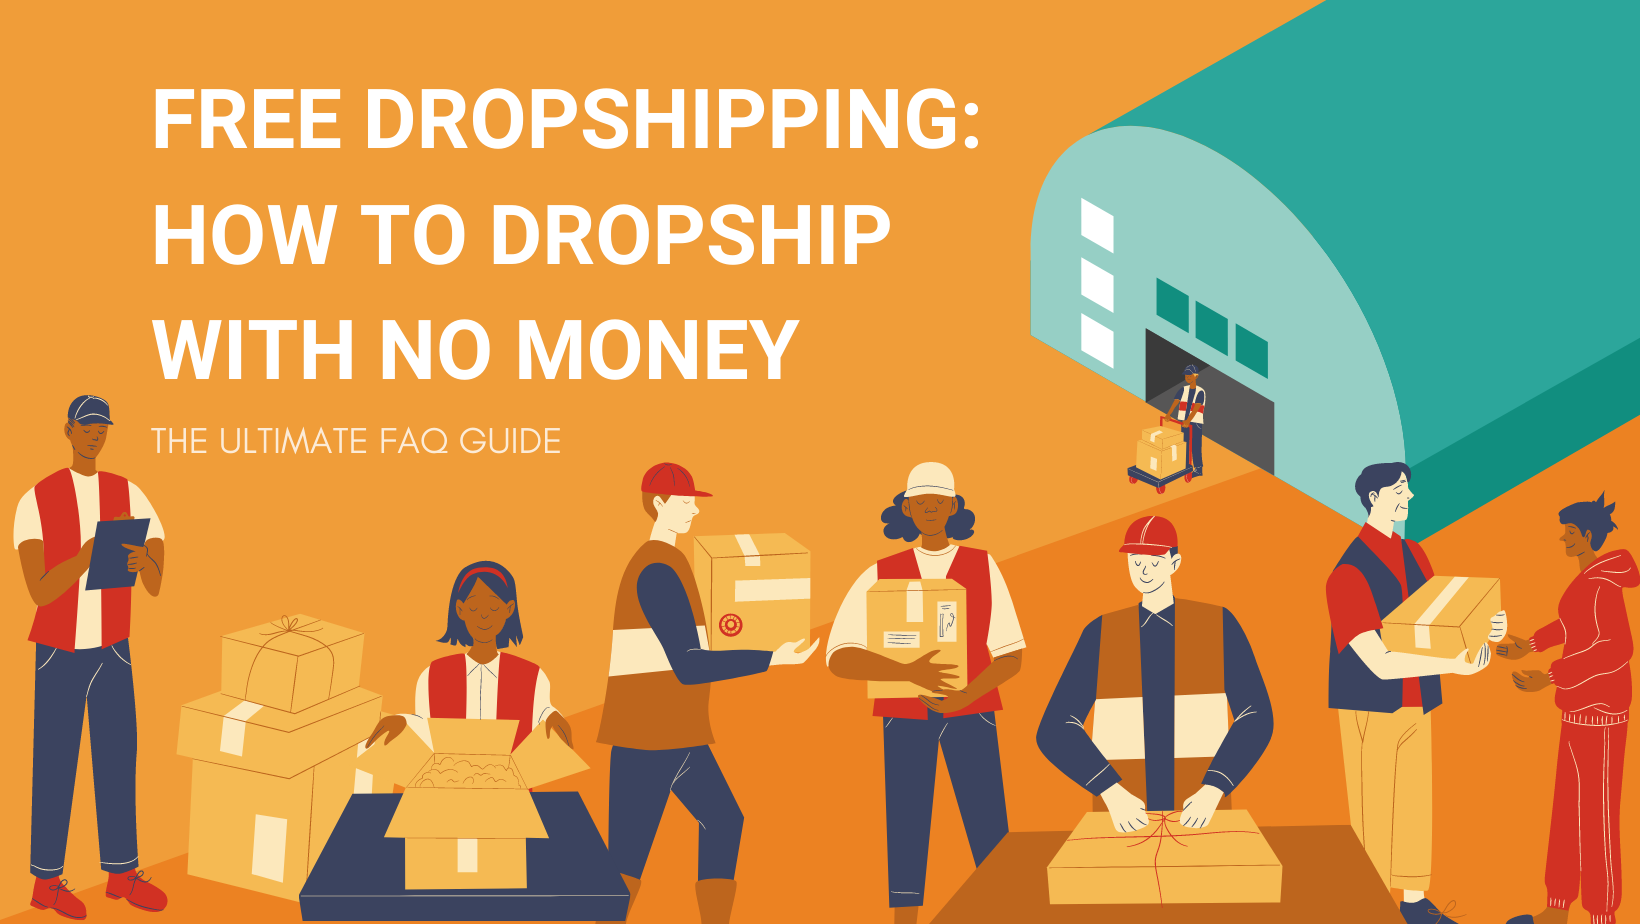 FREE DROPSHIPPING HOW TO DROPSHIP WITH NO MONEY